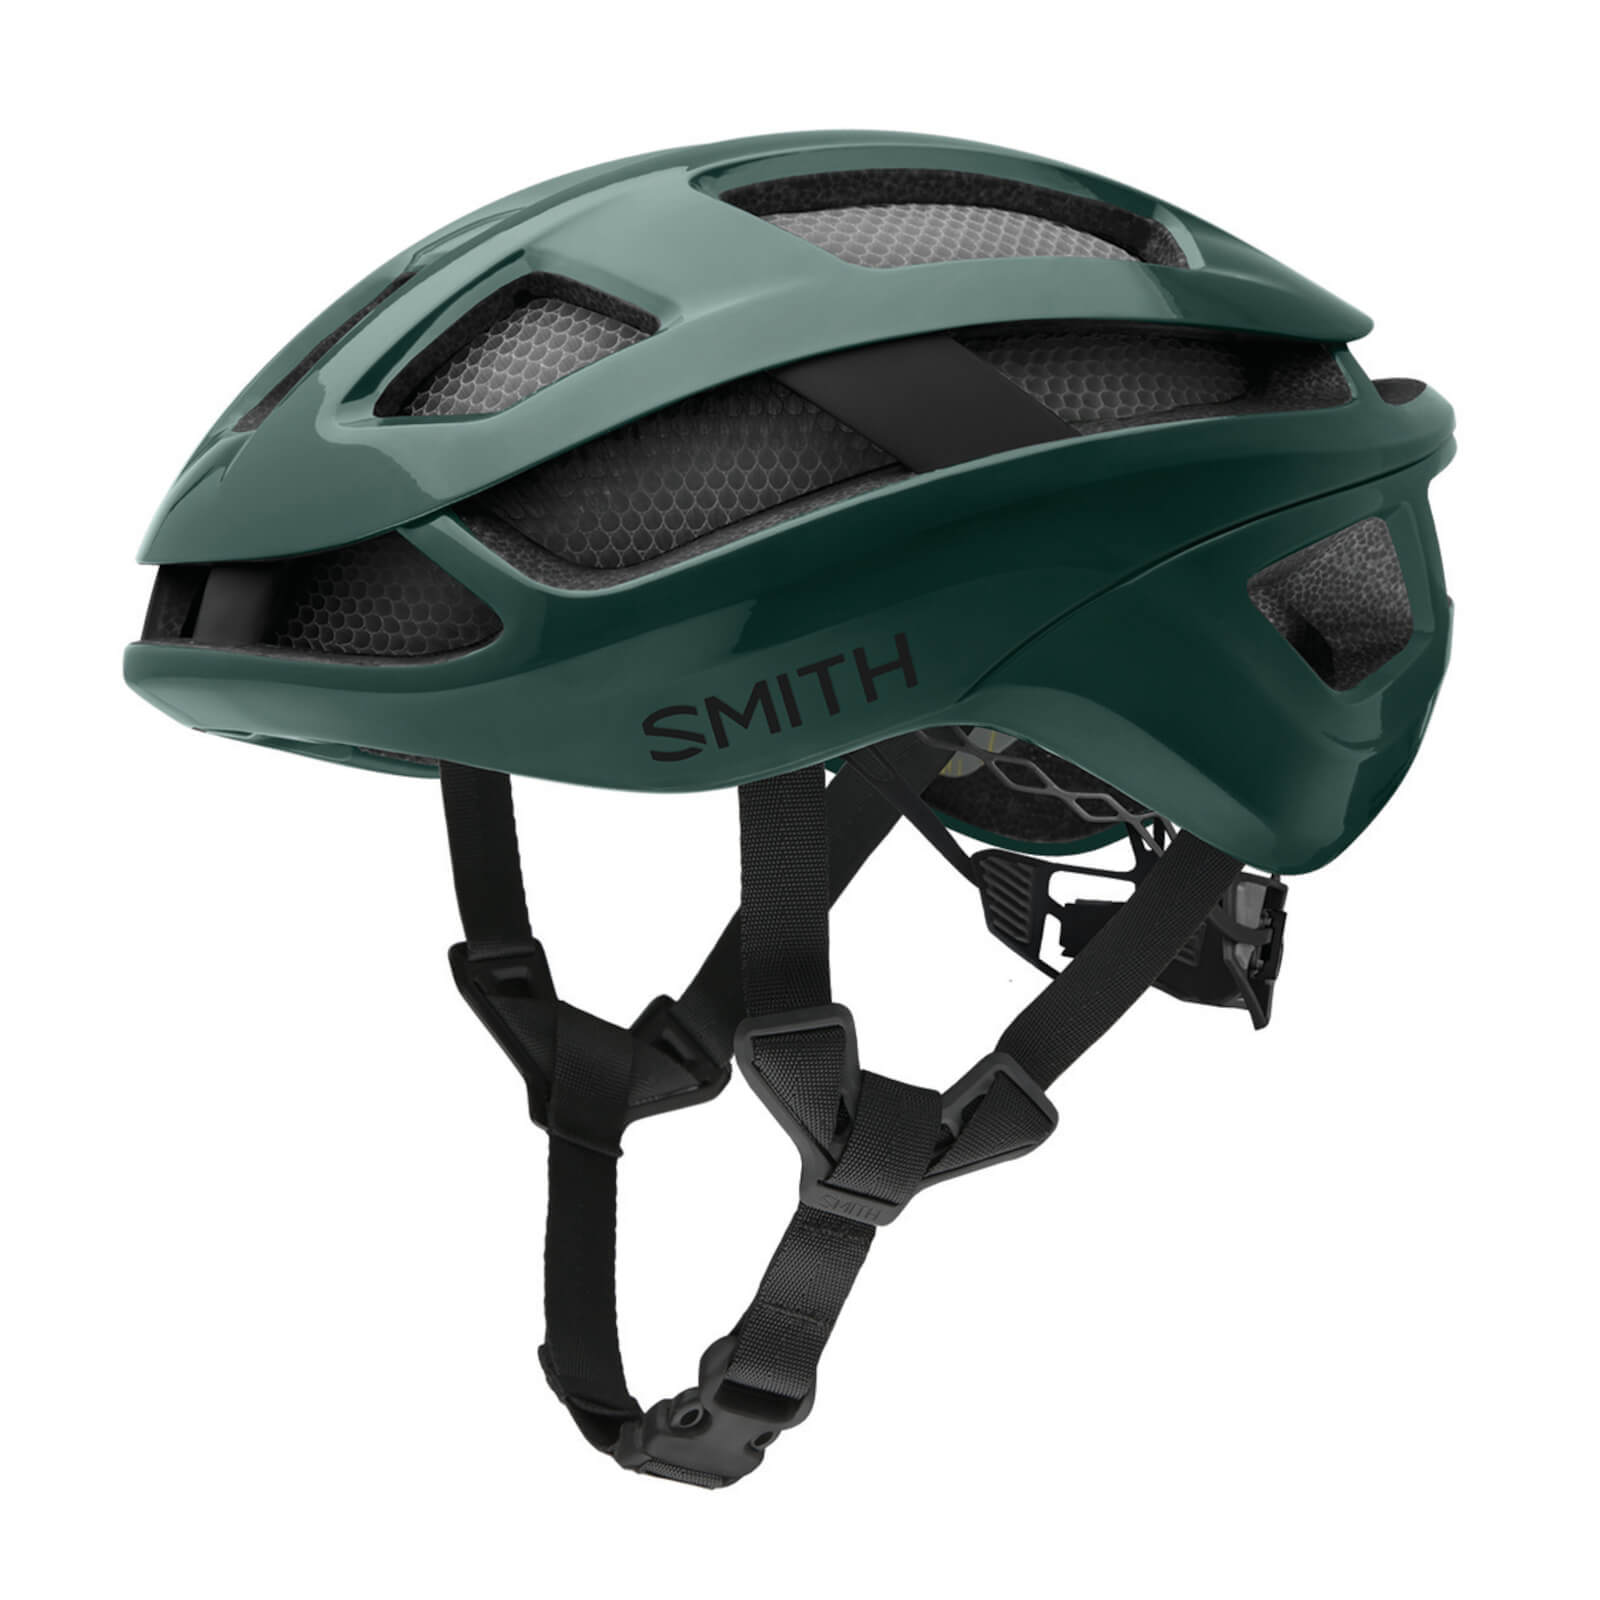 Smith Trace MIPS Road Helmet - Large - Spruce